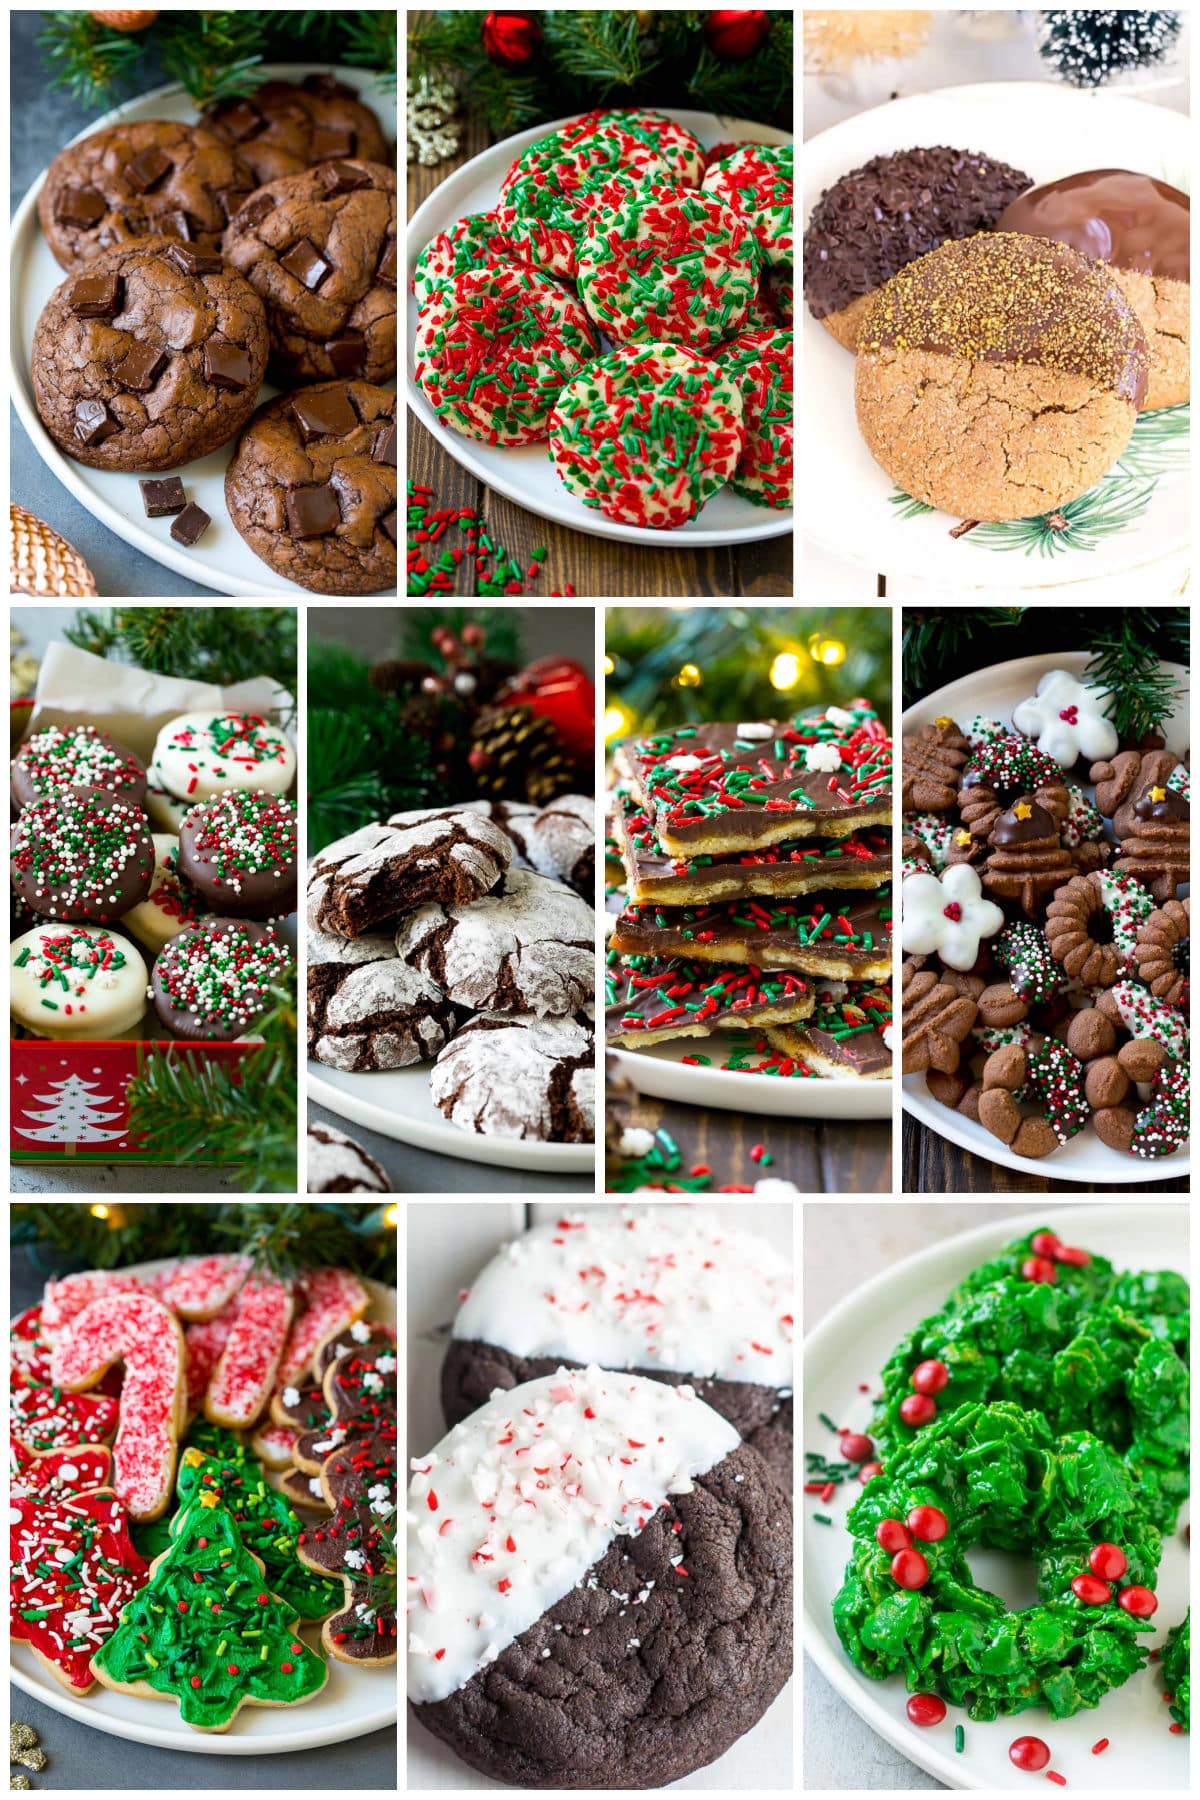 A collection of images of Christmas cookie recipes such as Christmas wreath cookies, chocolate spritz cookies and sugar cookies.